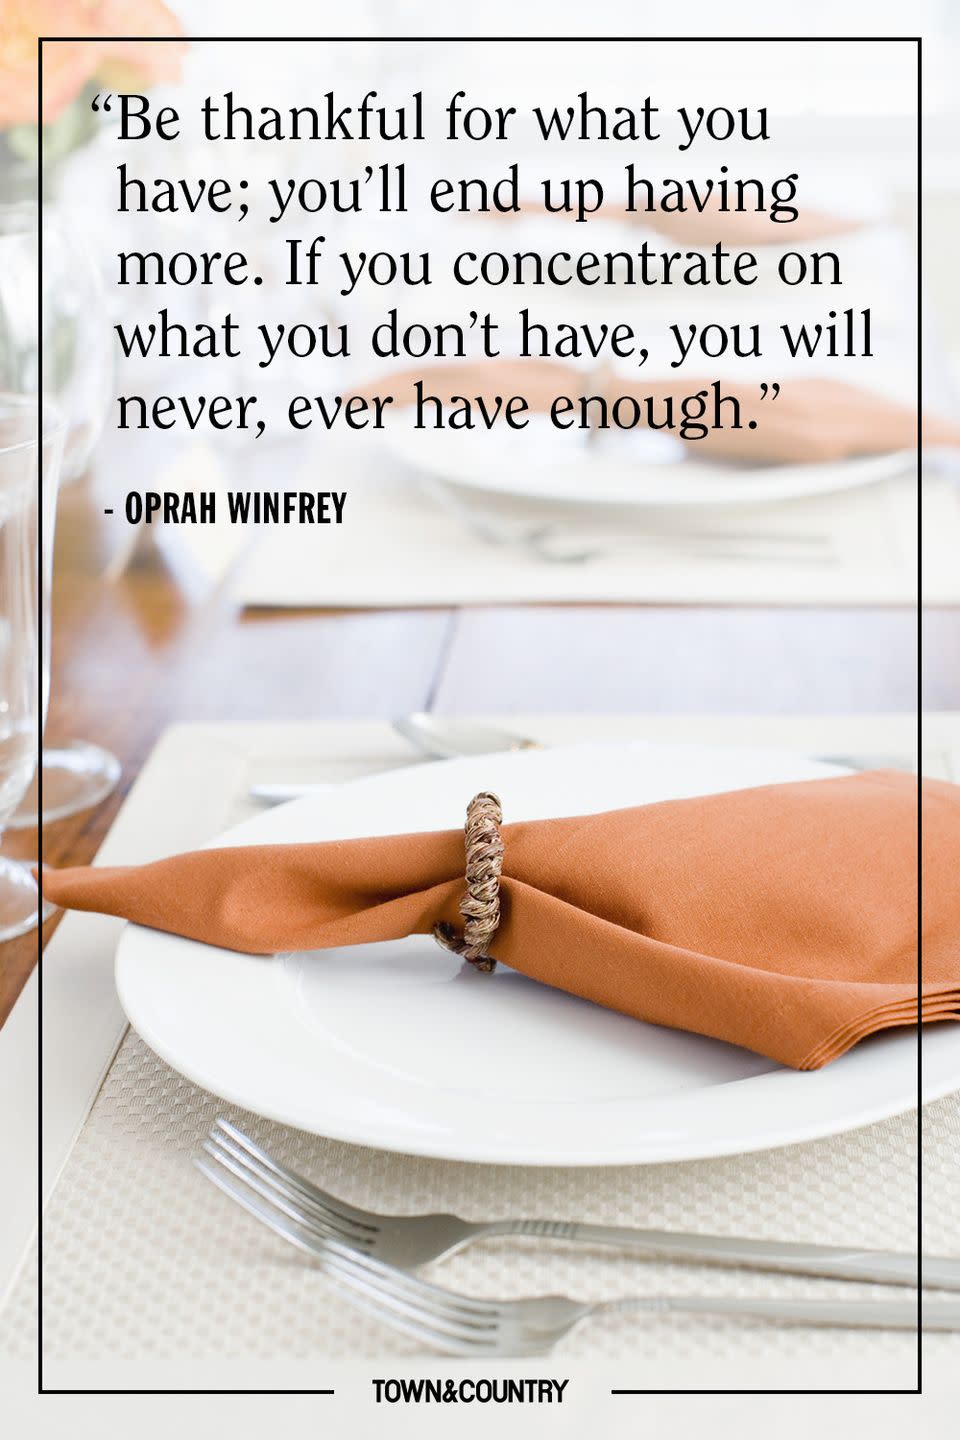 32 Quotes About Thanksgiving to Inspire Gratitude Ahead of the Holiday